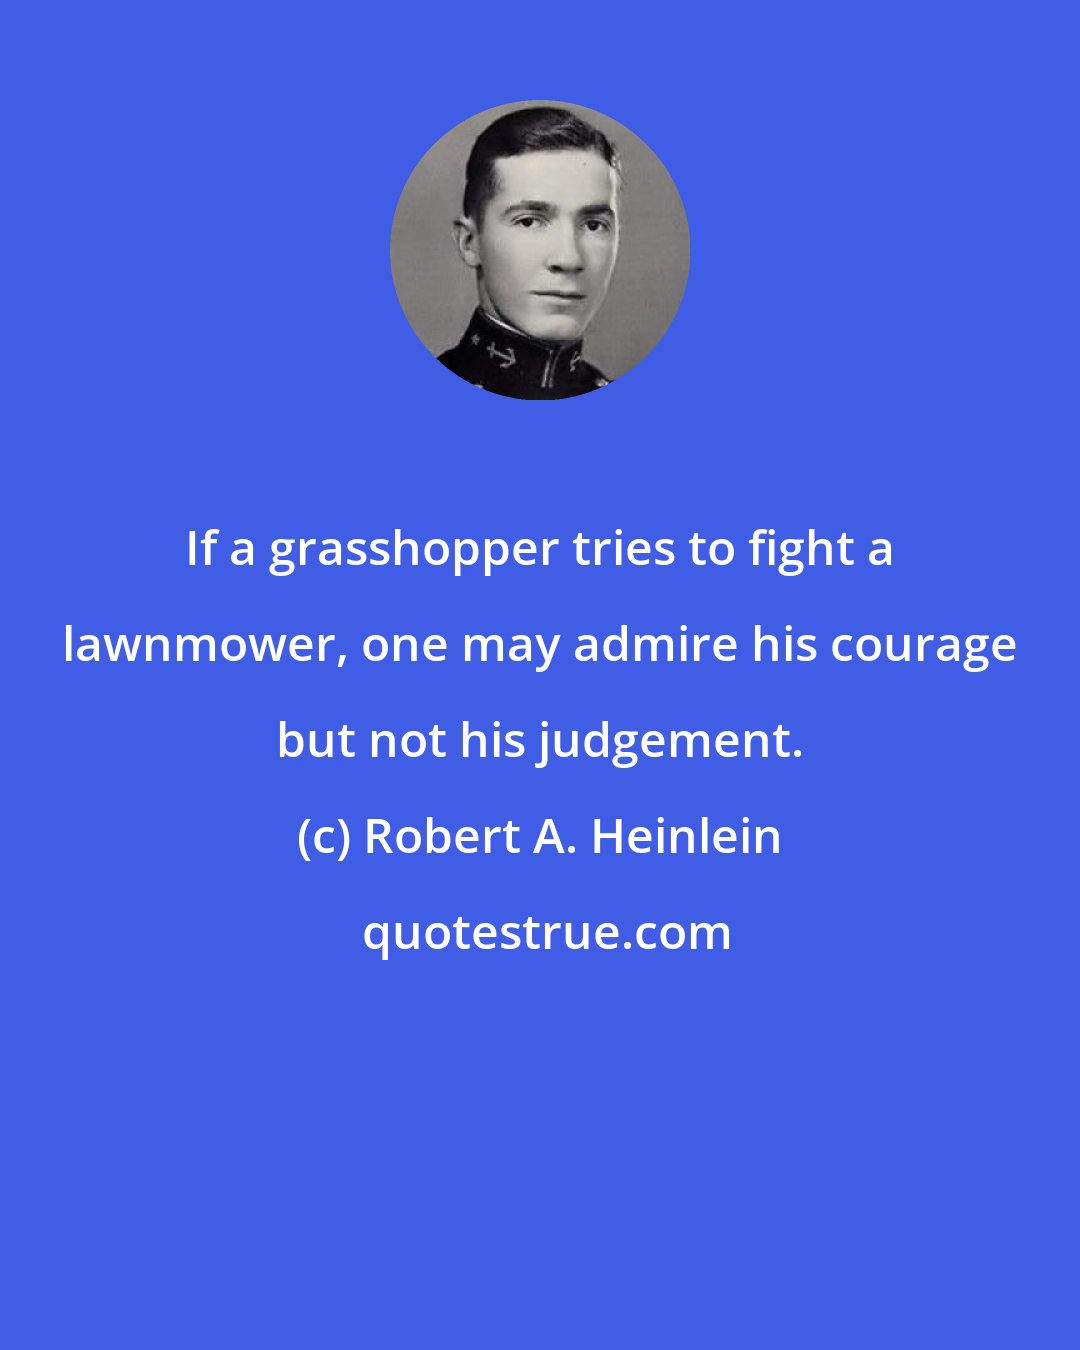 Robert A. Heinlein: If a grasshopper tries to fight a lawnmower, one may admire his courage but not his judgement.